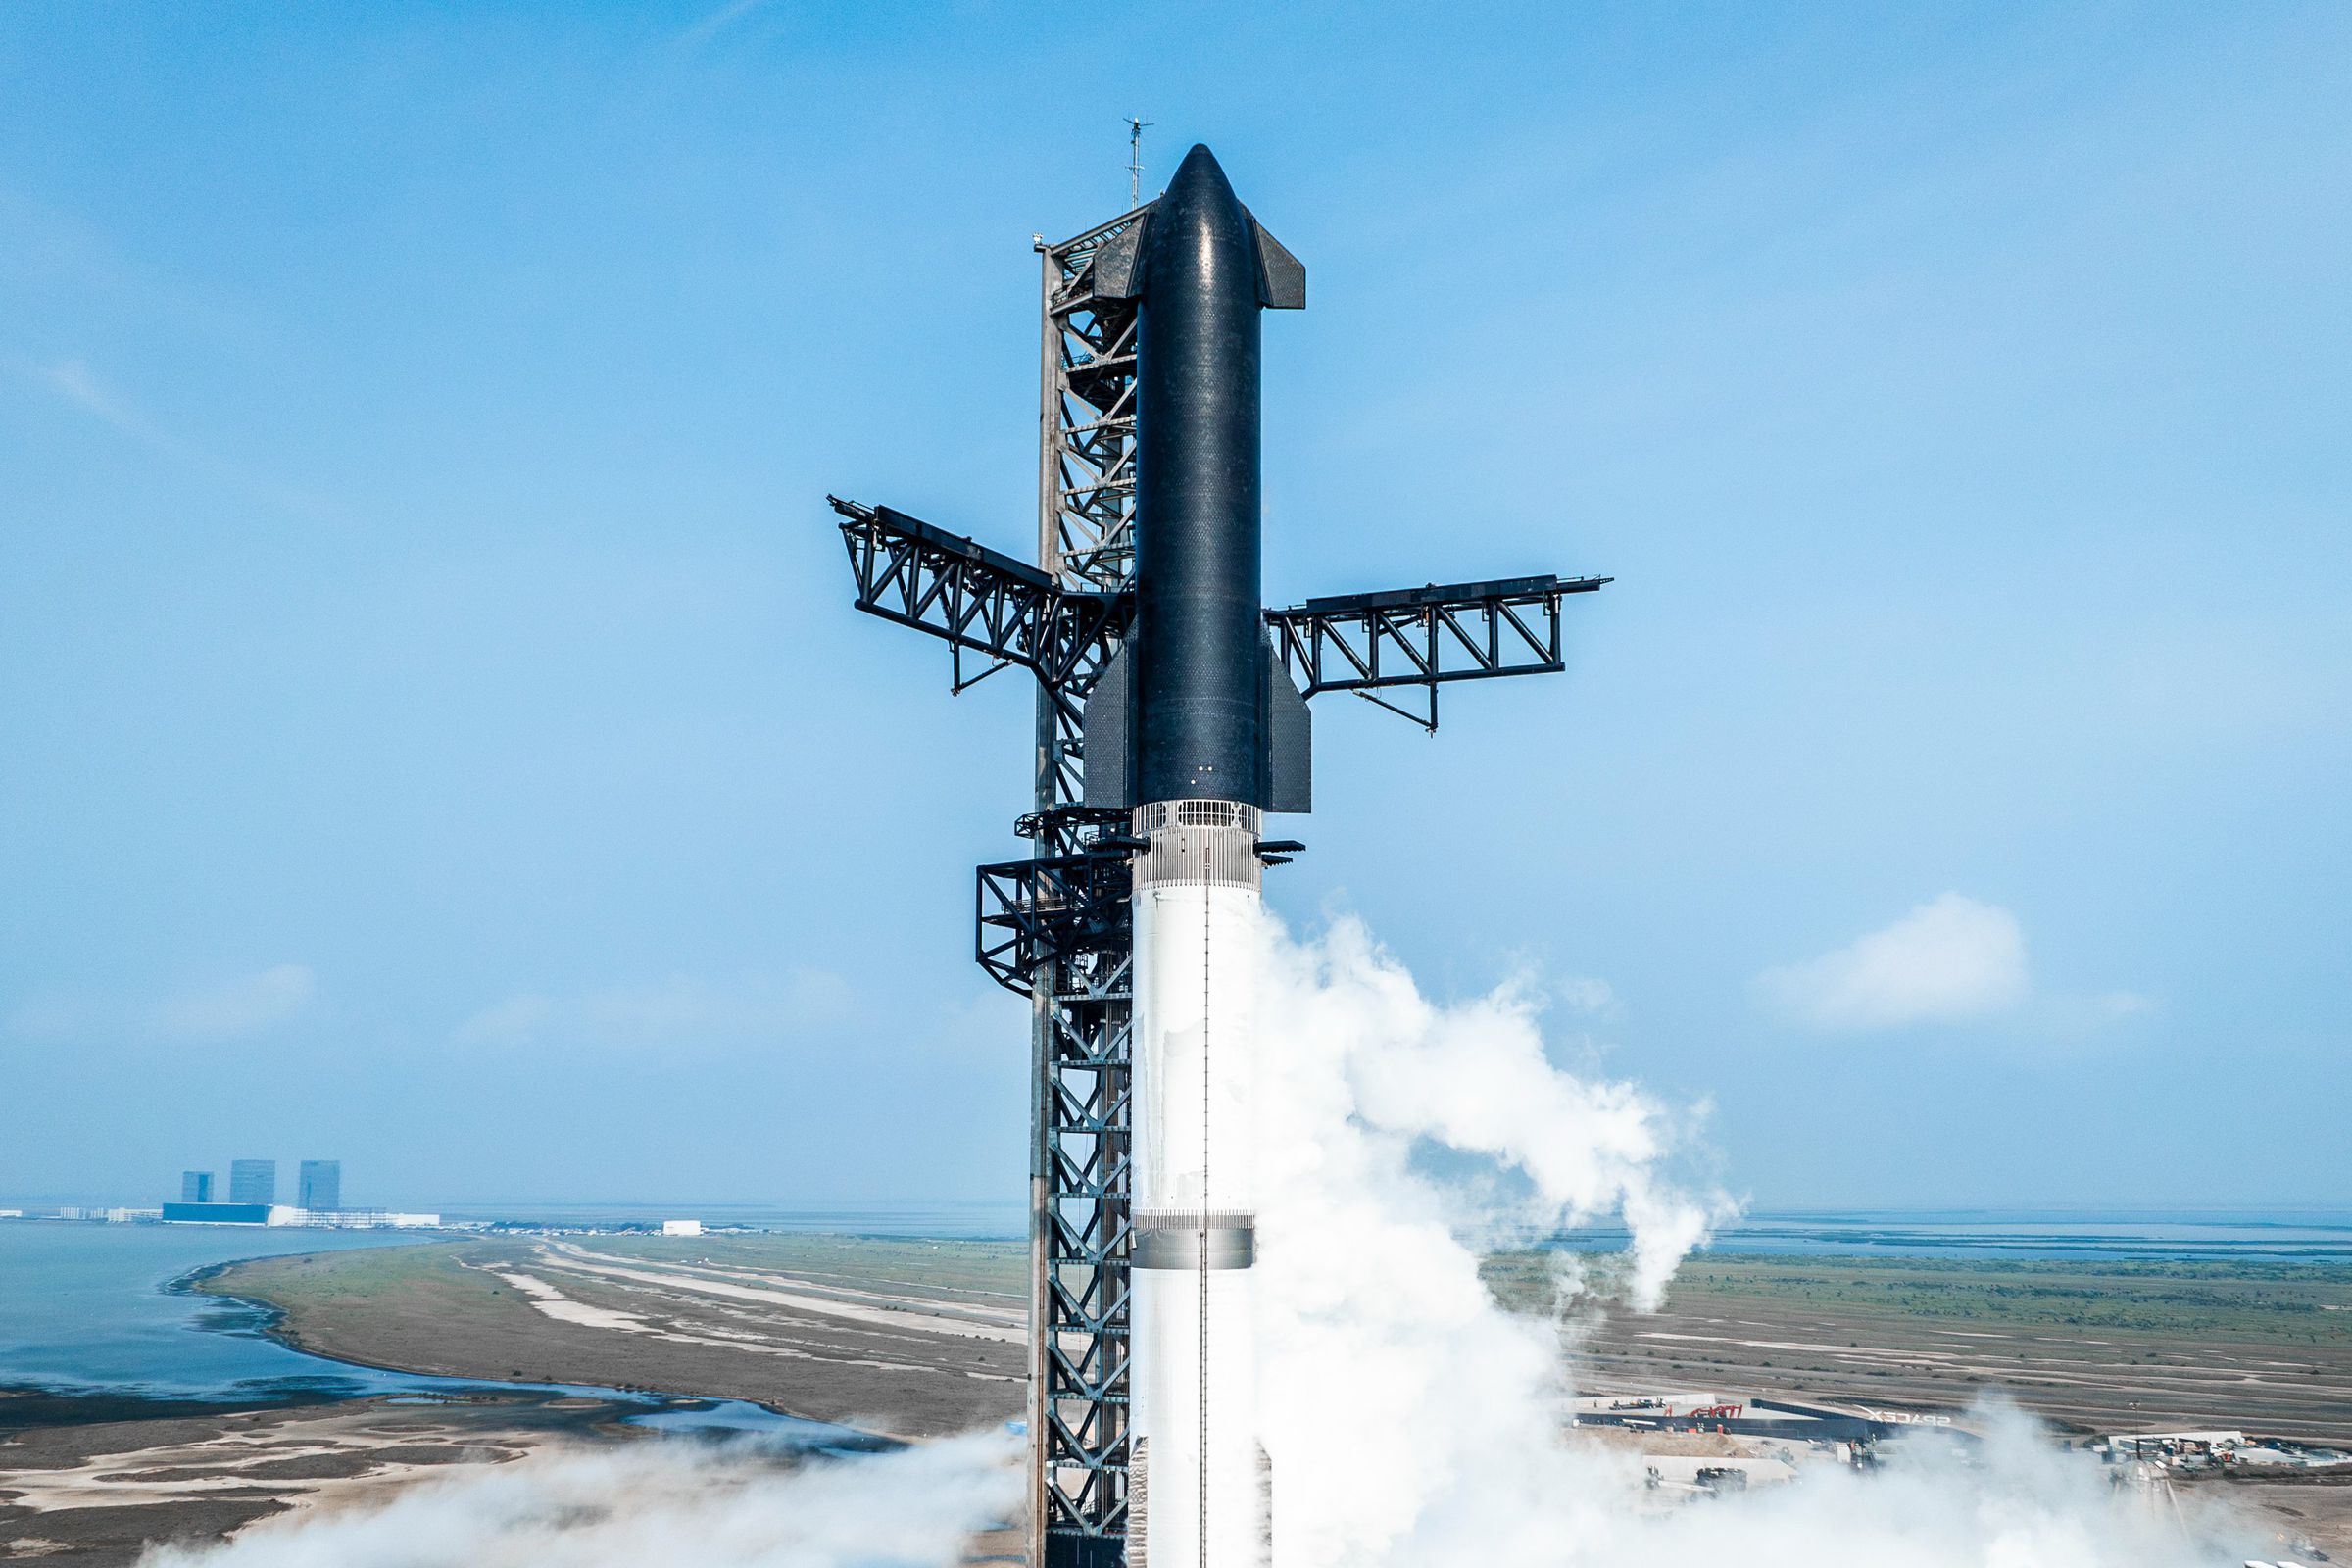 SpaceX’s Starship rocket on its launchpad.